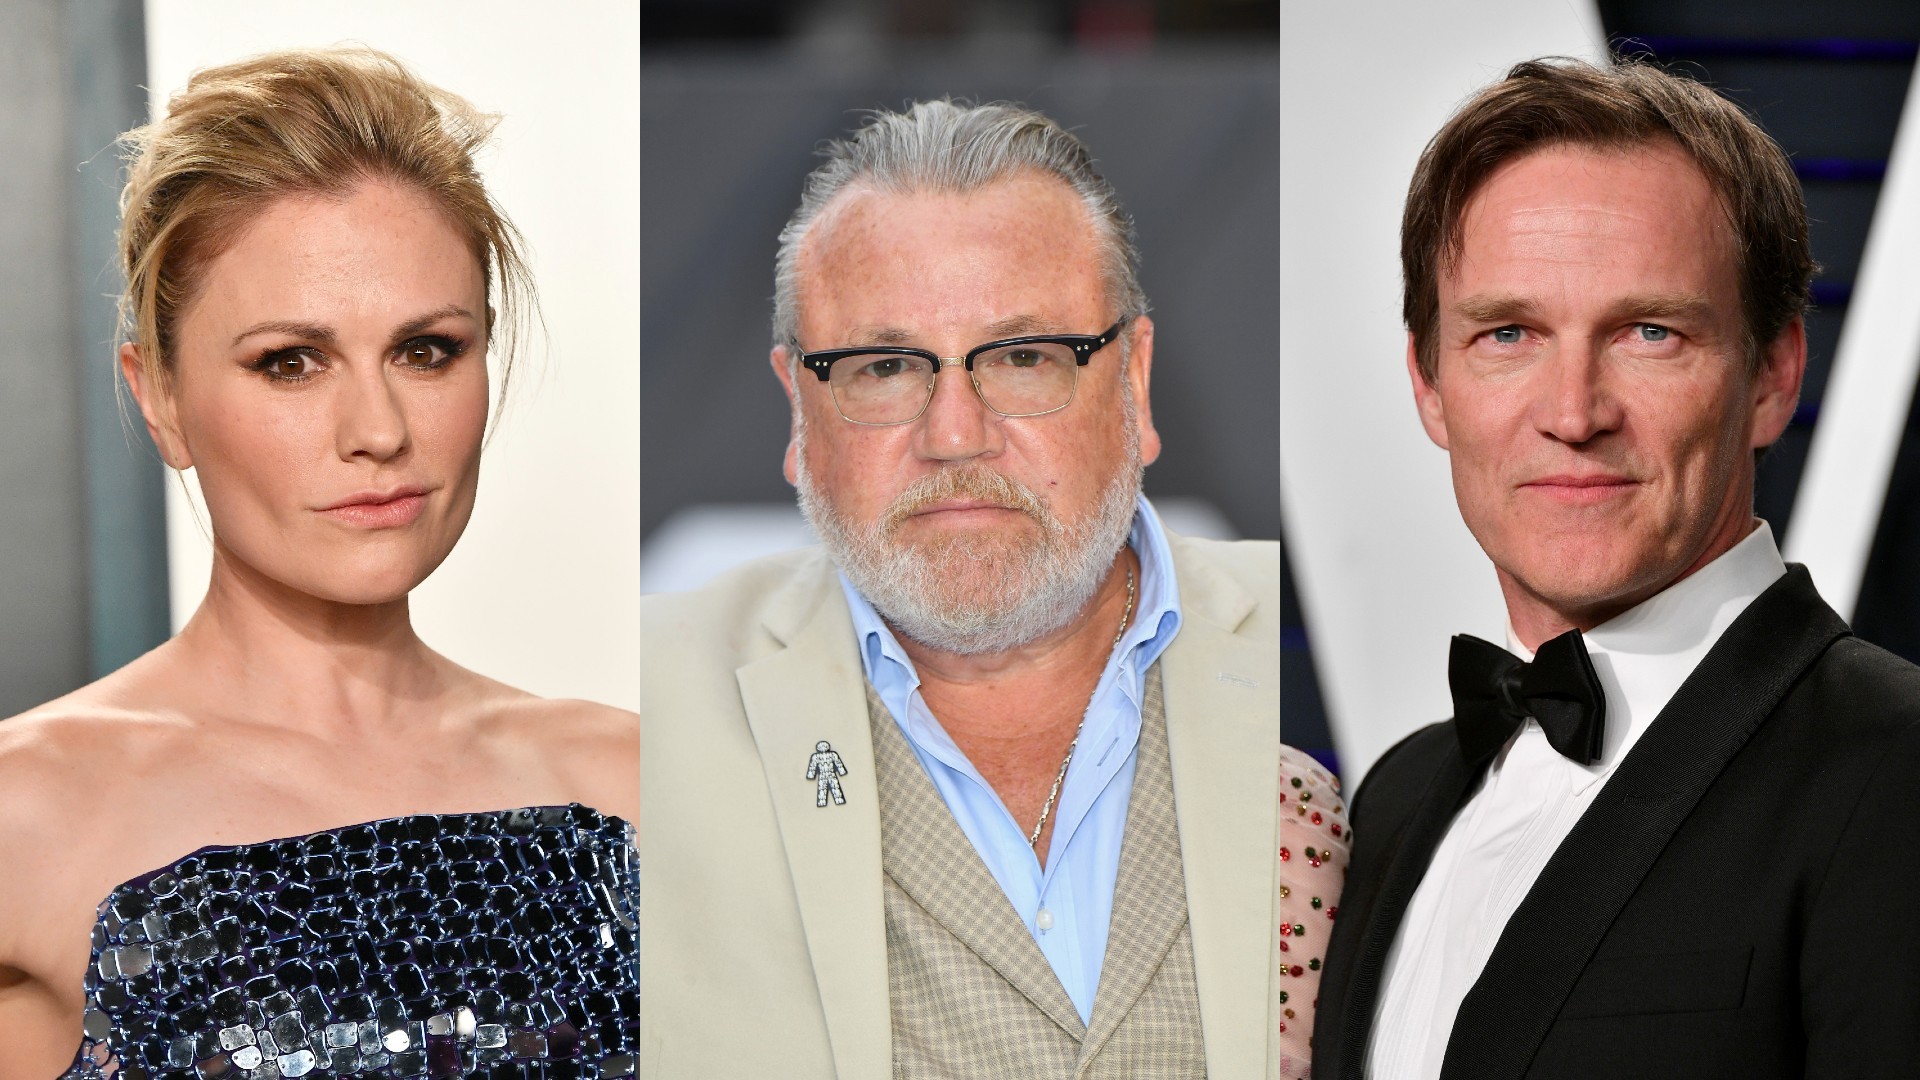 Husband and Wife Stephen Moyer and Anna Paquin Team Up for New Film 'A Bit of Light', with Ray Winstone Co-Starring